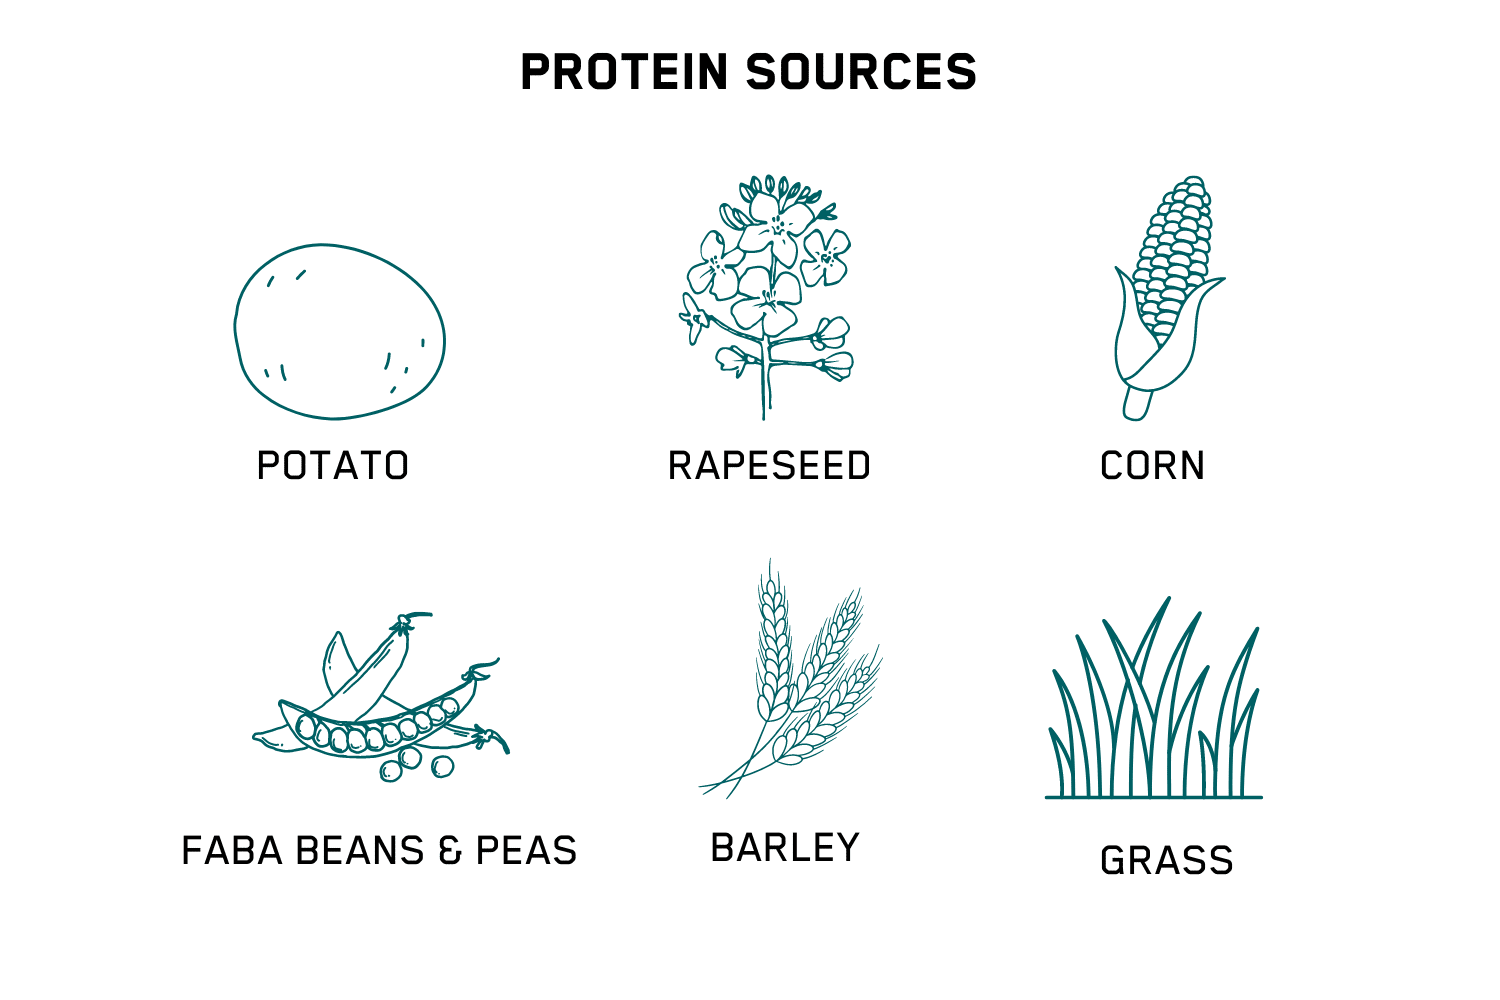 Atria has tried different protein sources to replace soy